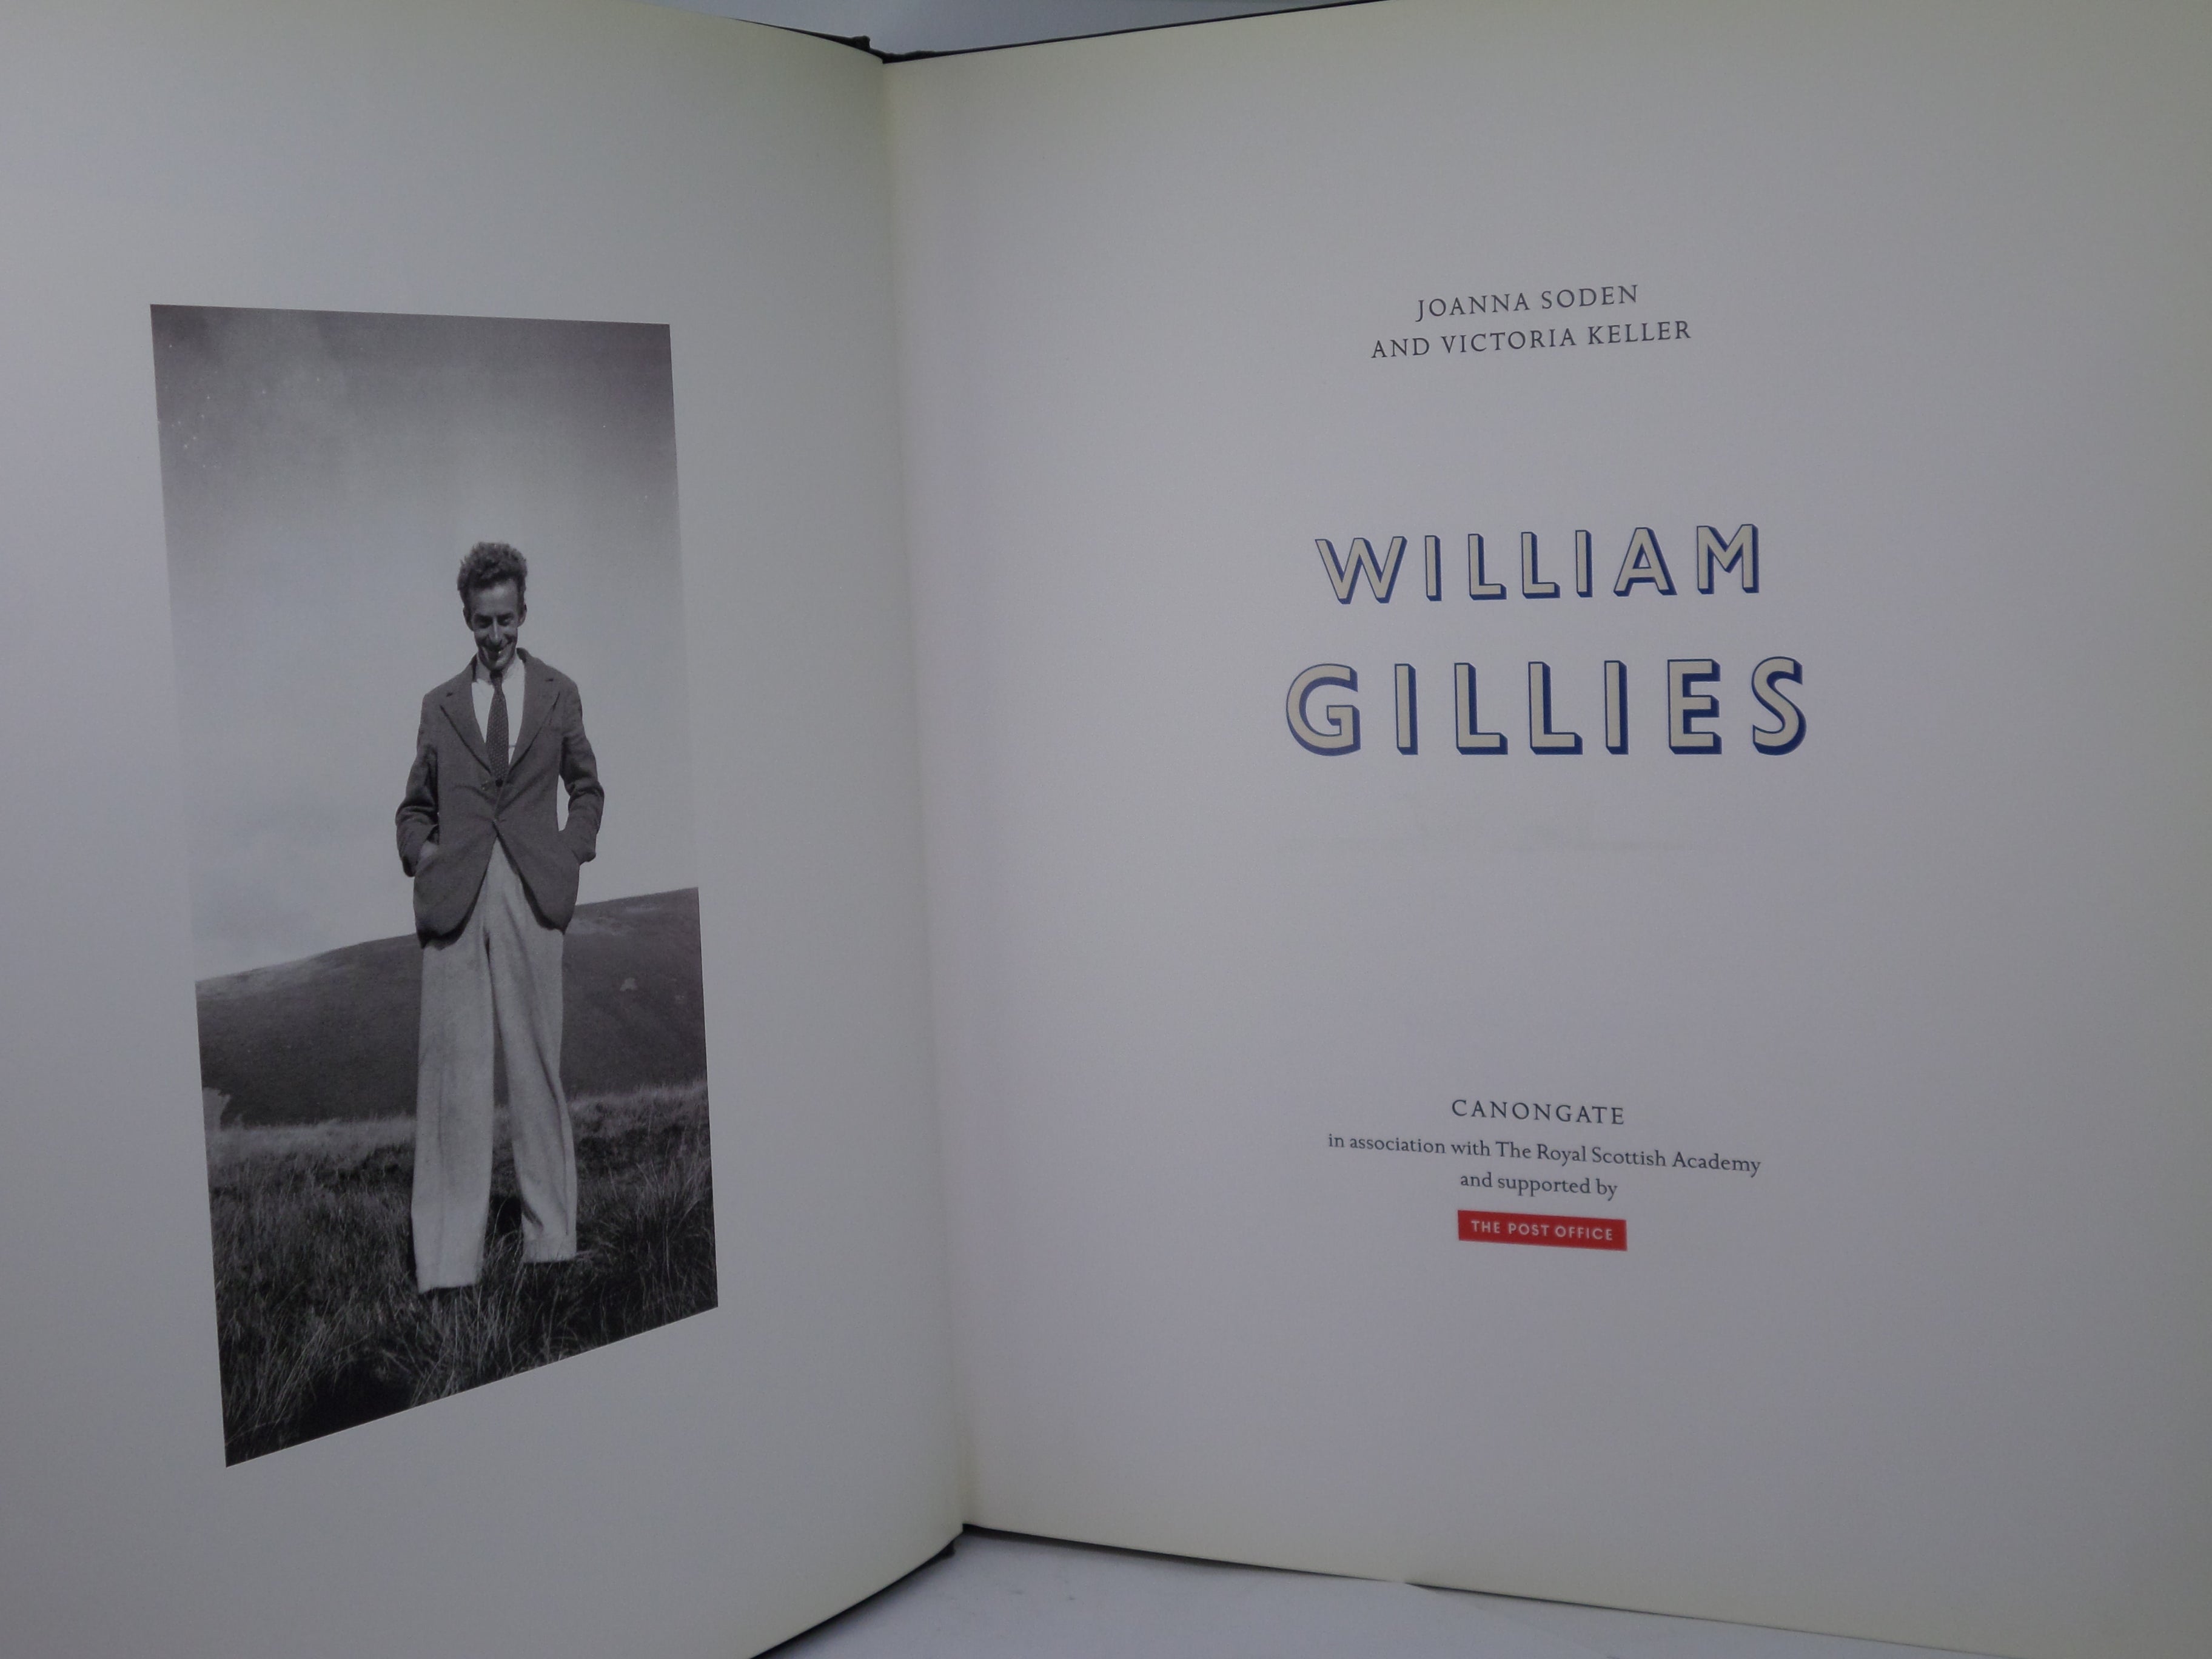 WILLIAM GILLIES BY JOANNA SODEN & VICTORIA KELLER 1998 FIRST EDITION HARDCOVER